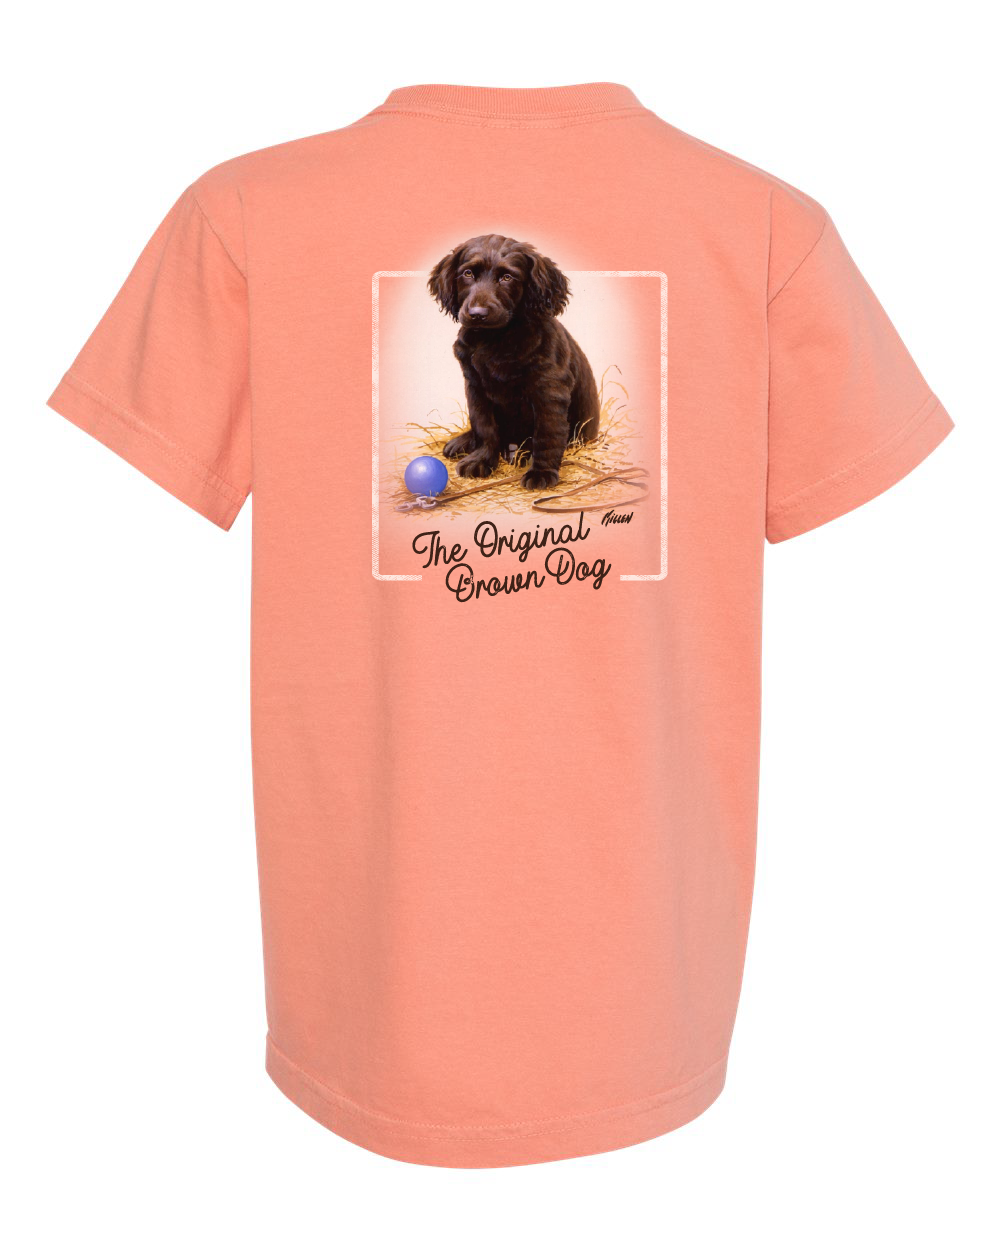 Late for School - Boykin Spaniel Puppy YOUTH Ring Spun Cotton Tee